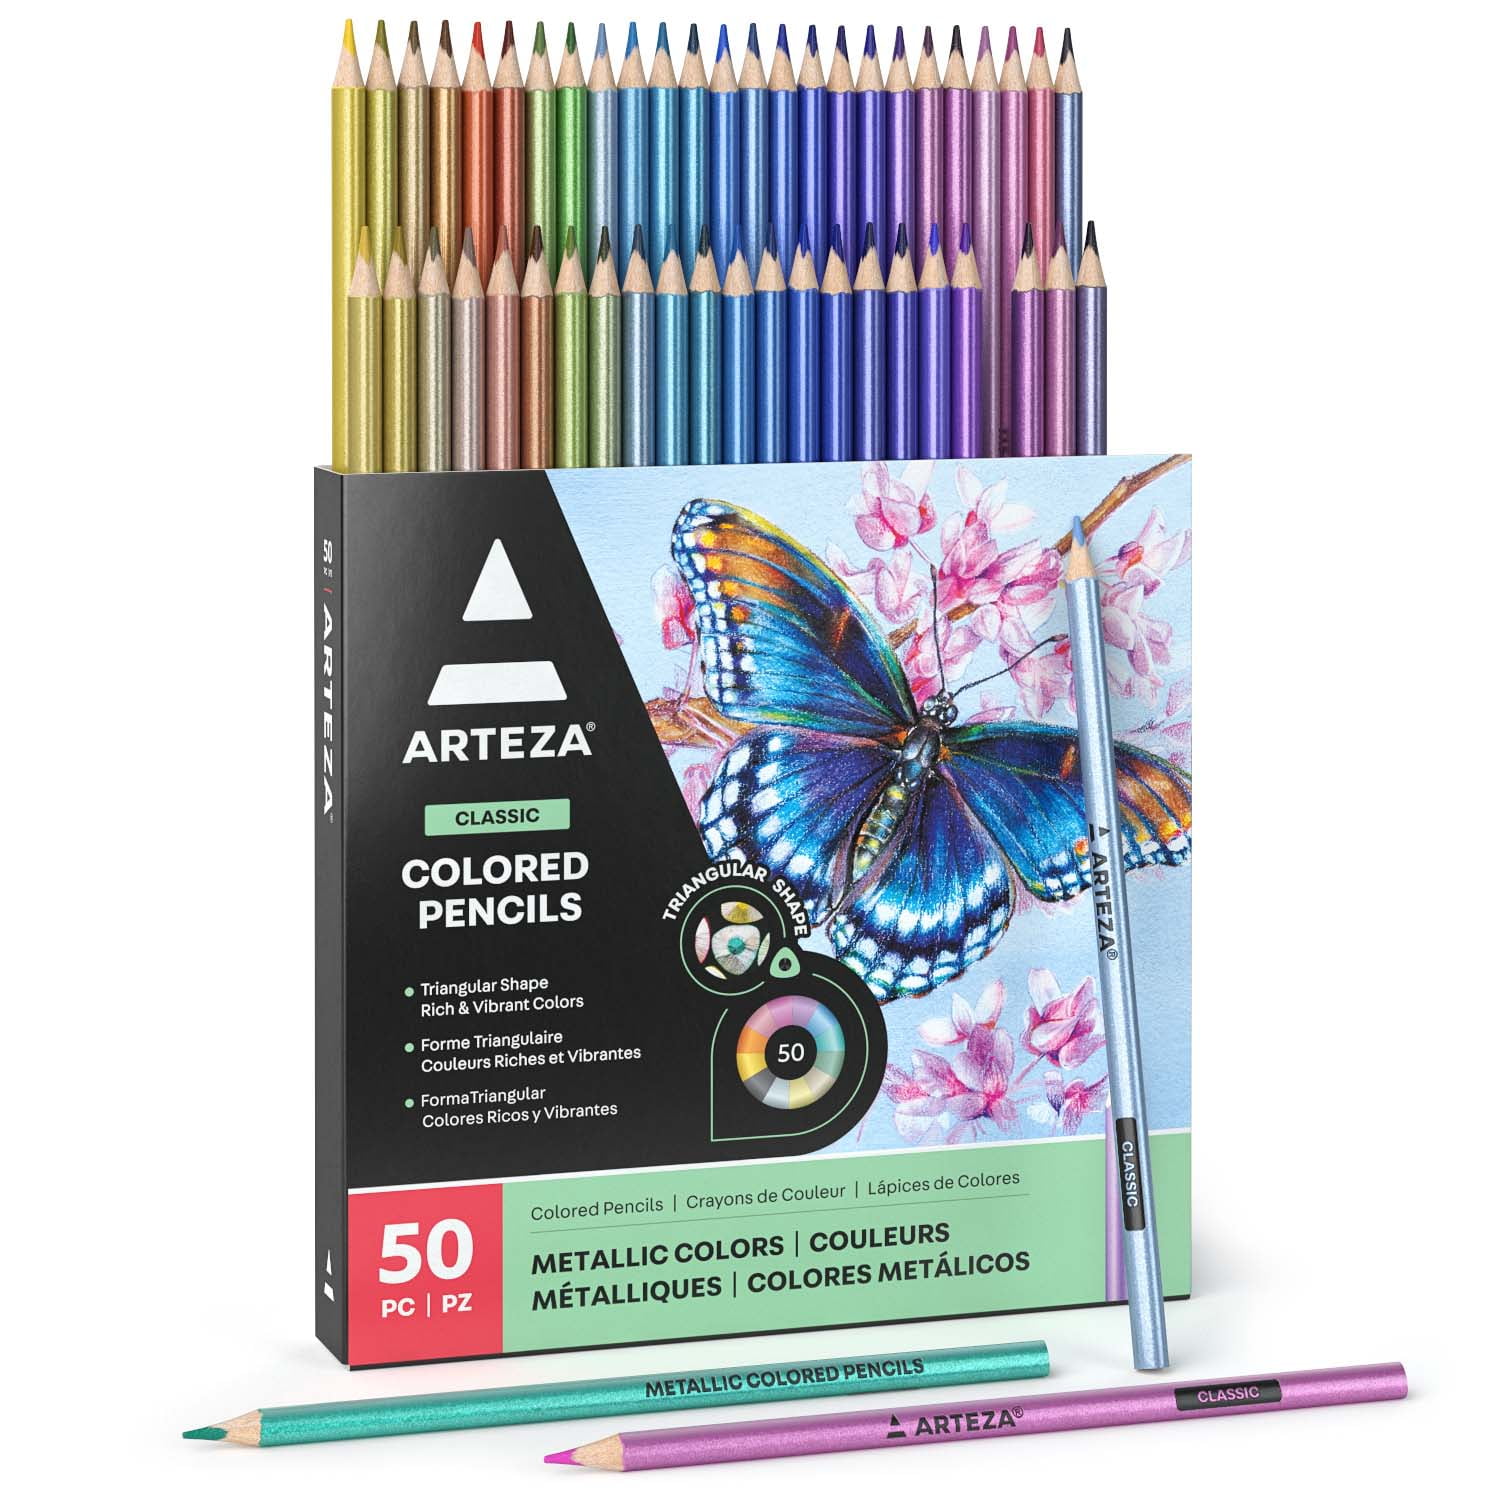 Arteza Metallic Colored Pencils, Set of 50, Triangular Grip, Pre-Sharpened  Coloring Pencils, Art Supplies for Coloring and Drawing